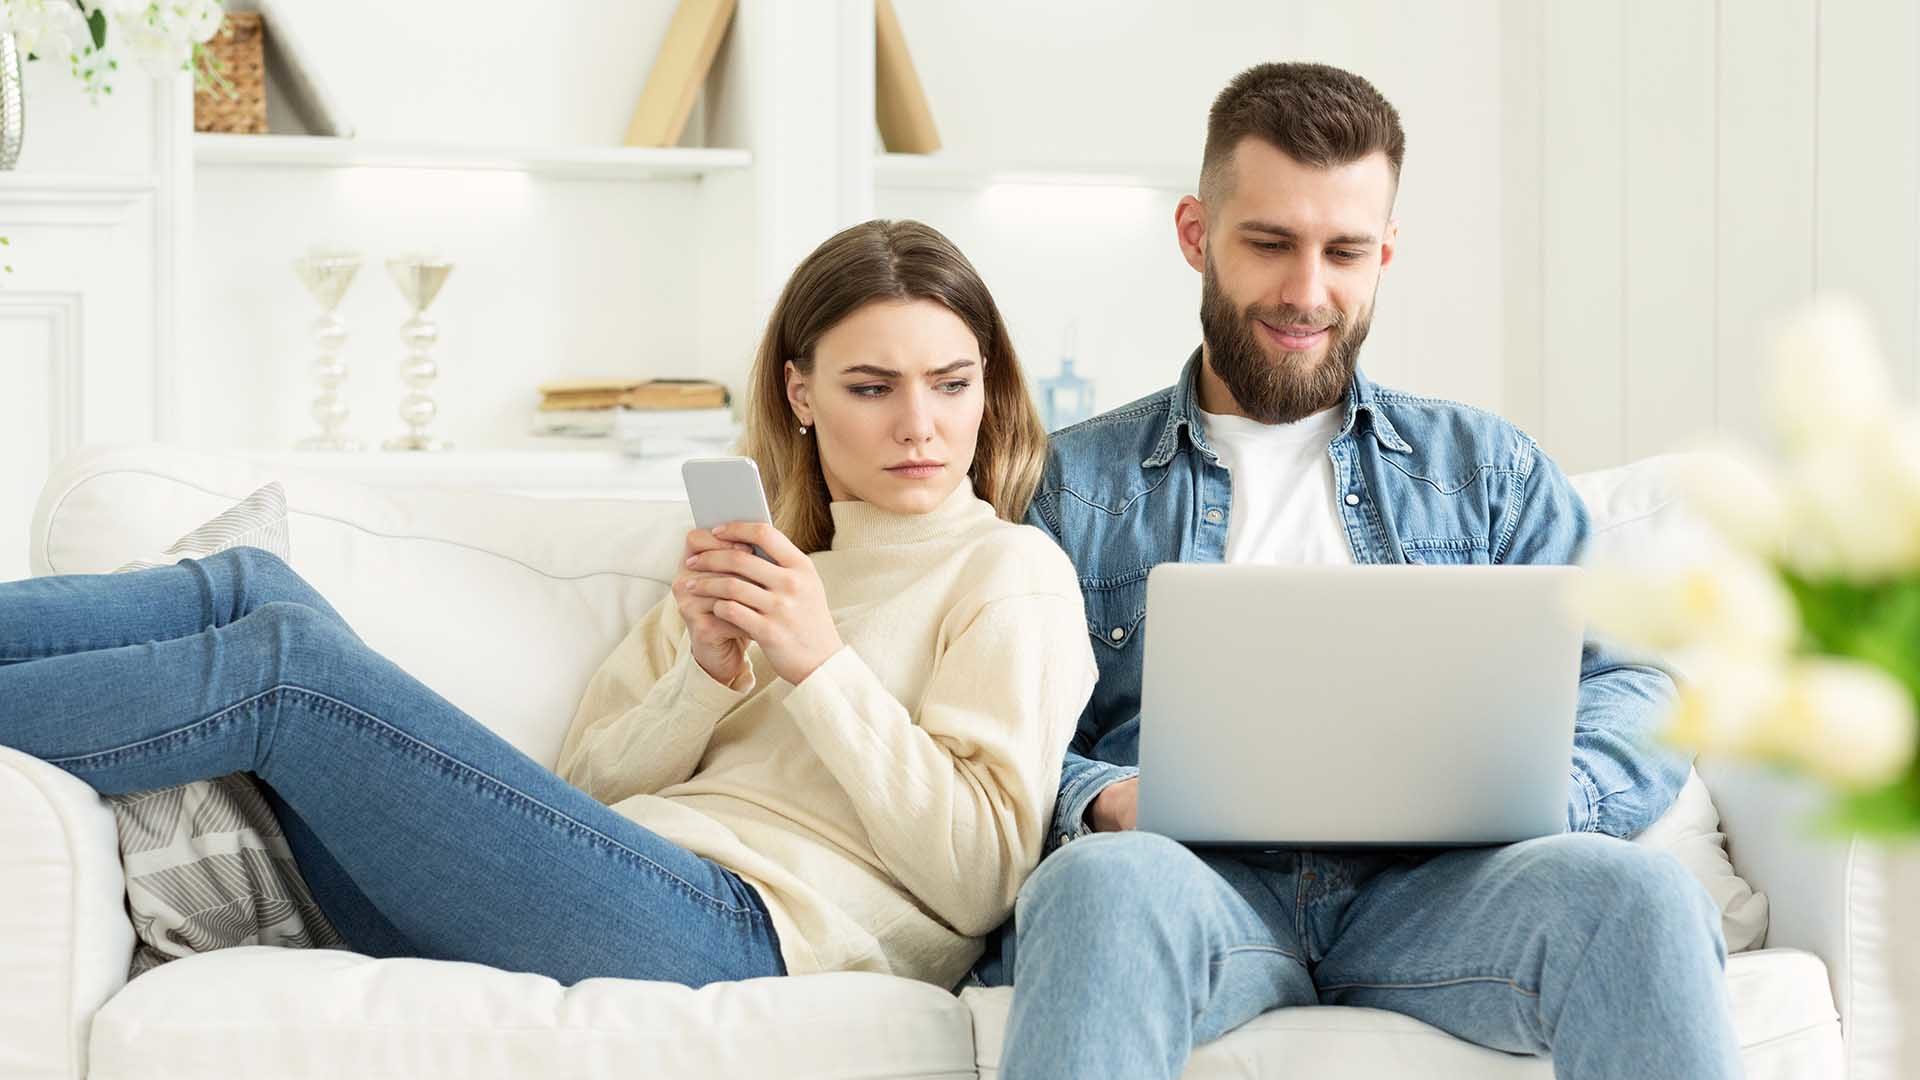 Woman looking at husband's laptop, sitting together on sofa with cellphone